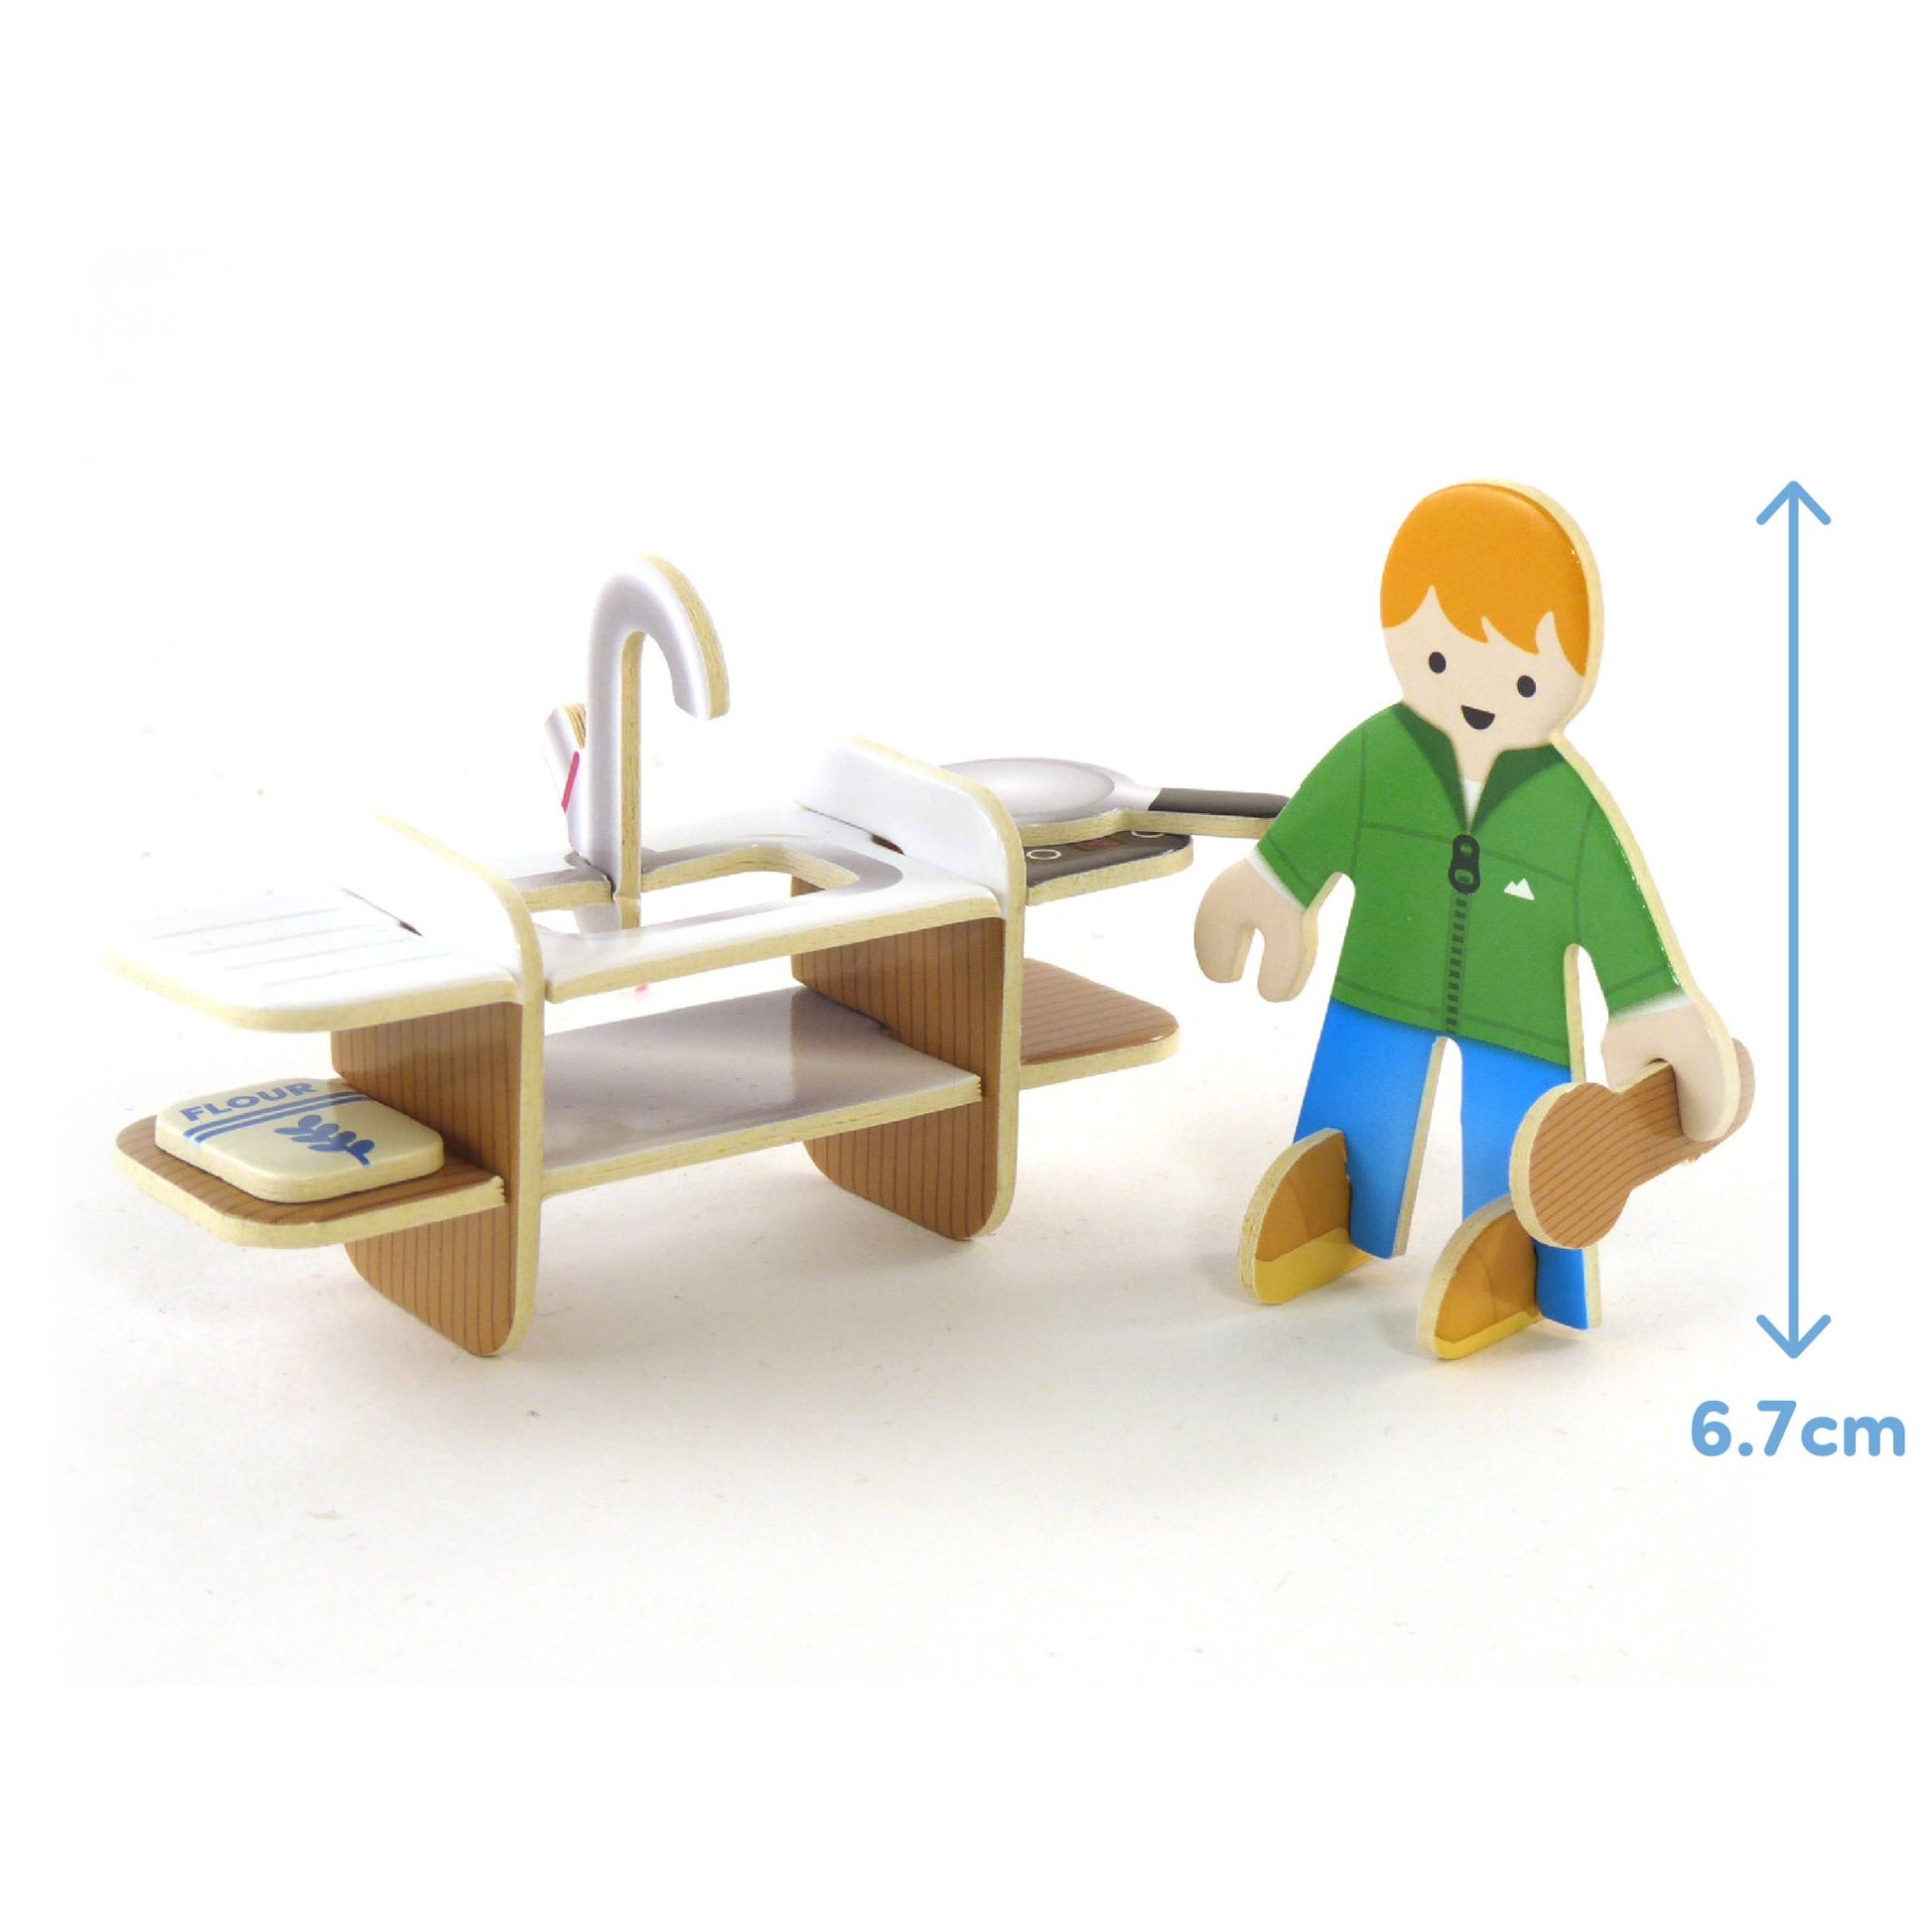 Build and Play Eco House Play Set - kitchen measurement